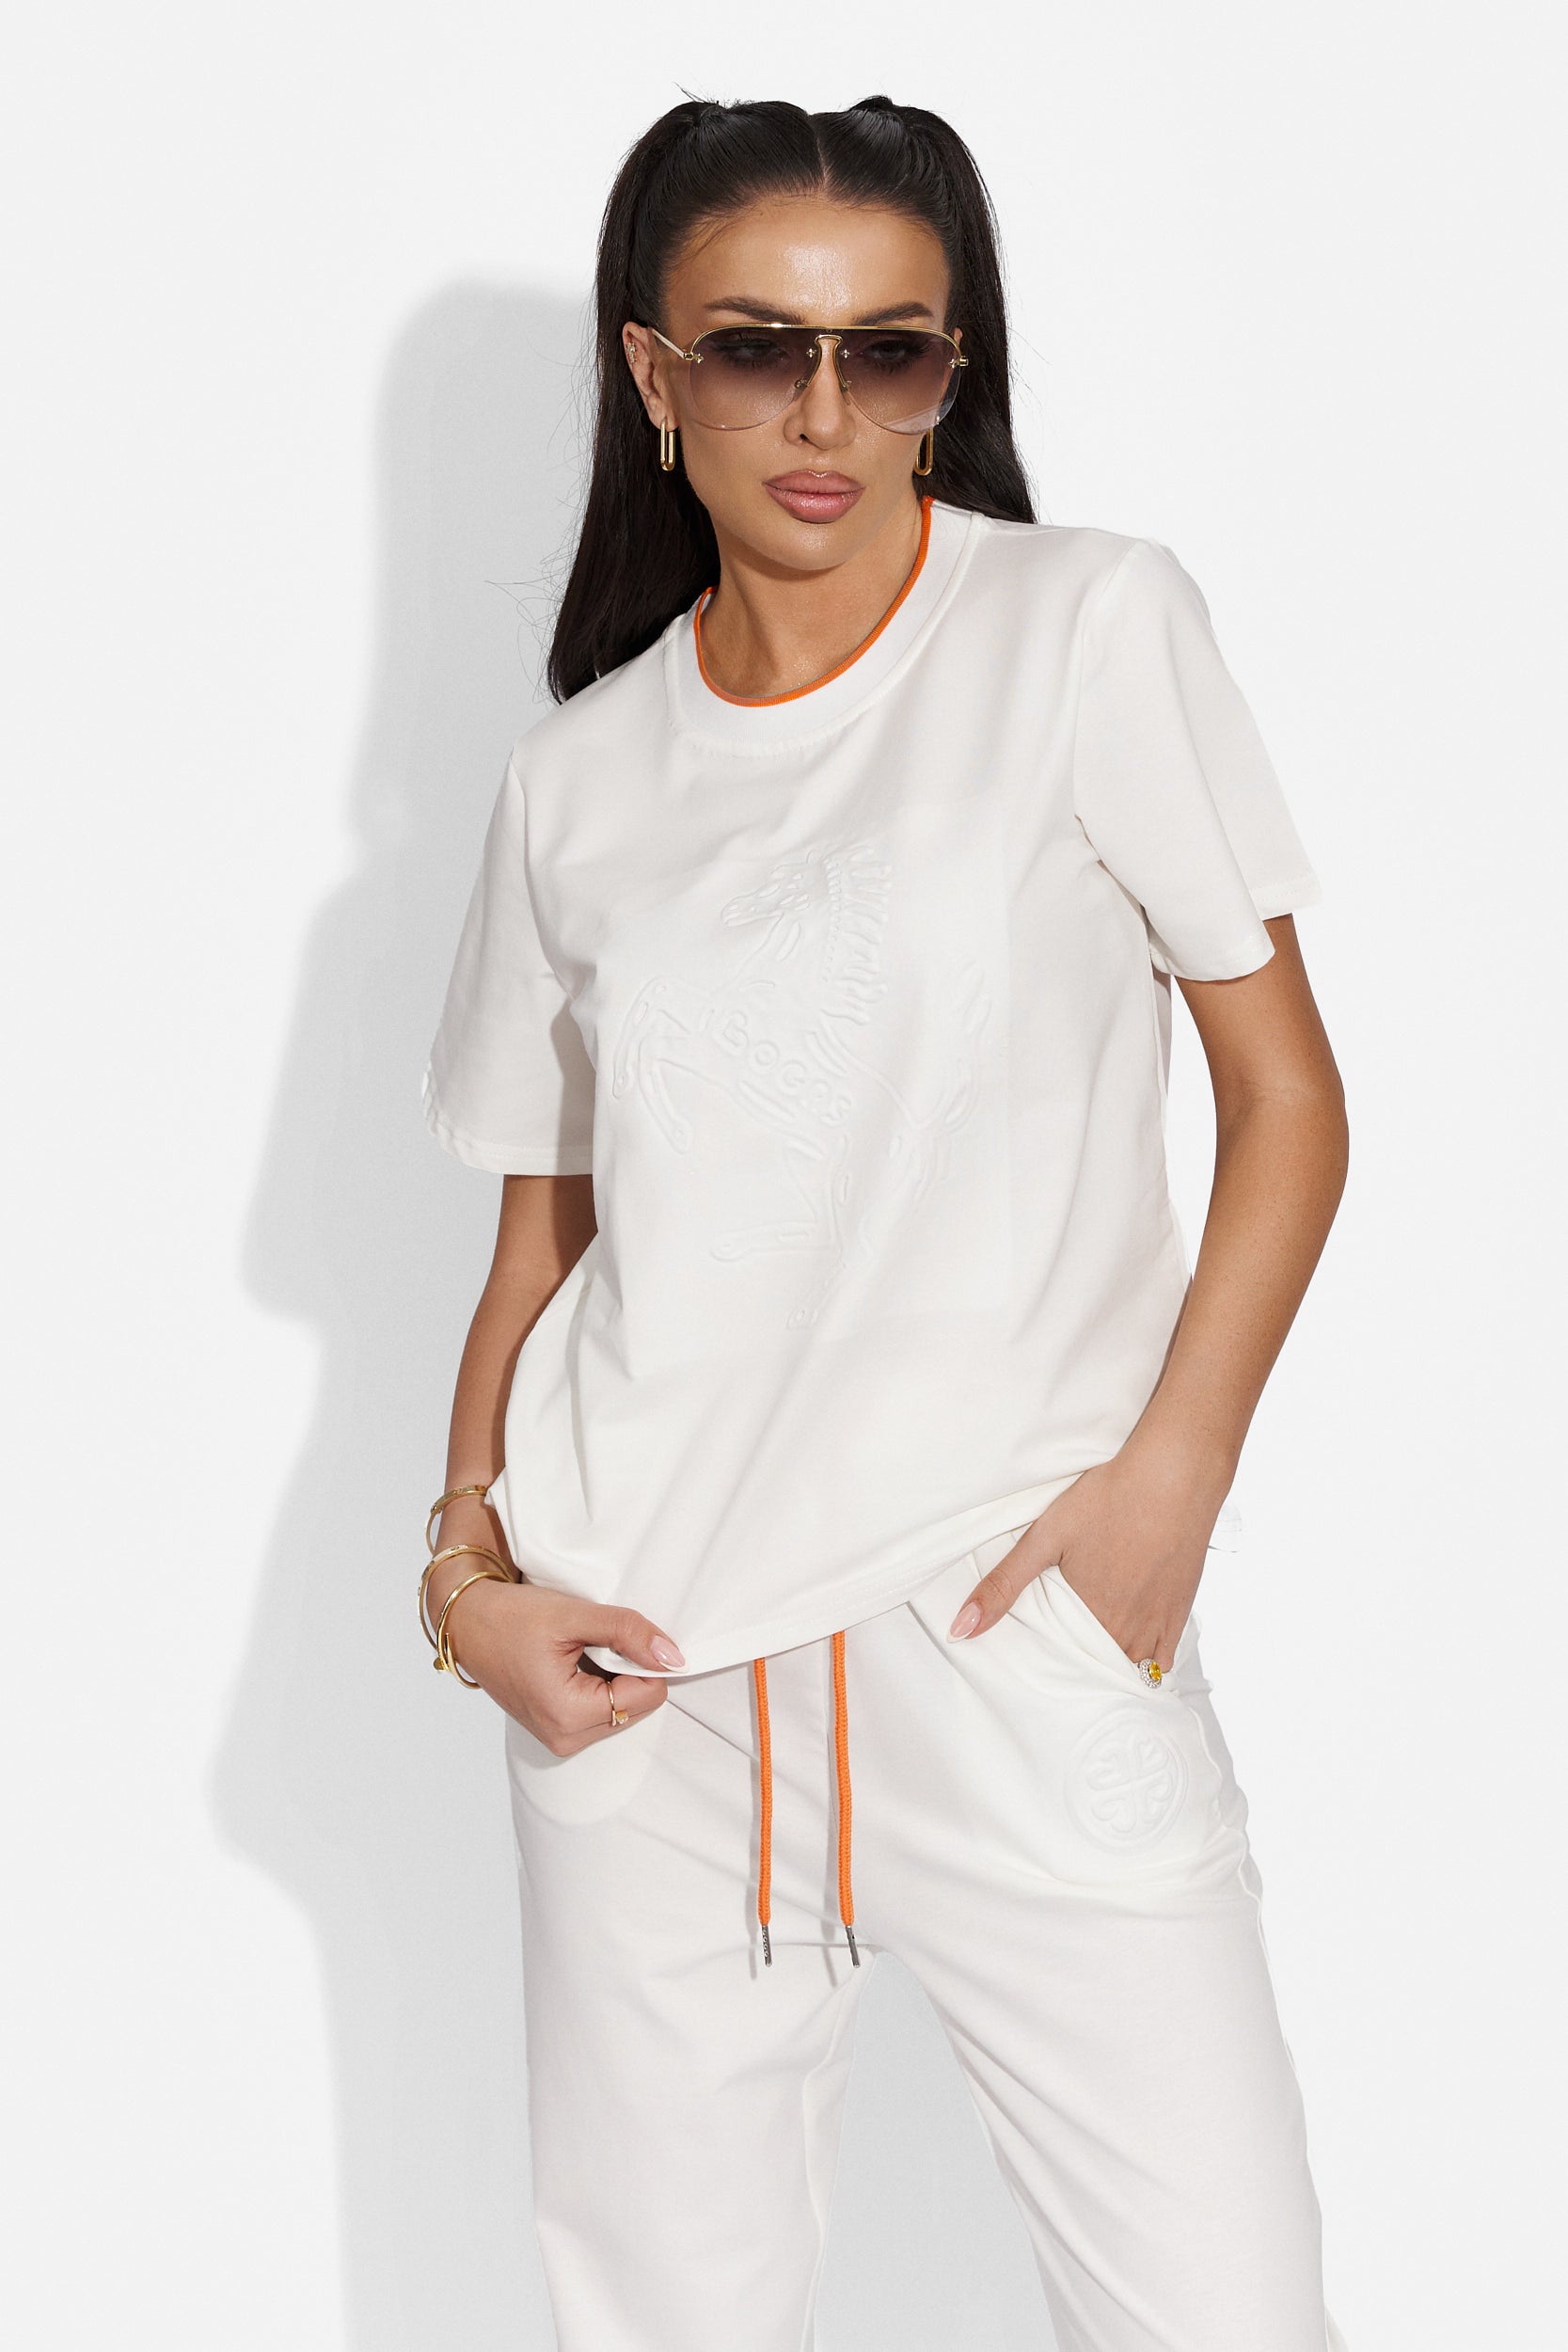 Giovana Bogas casual white lady's tracksuit